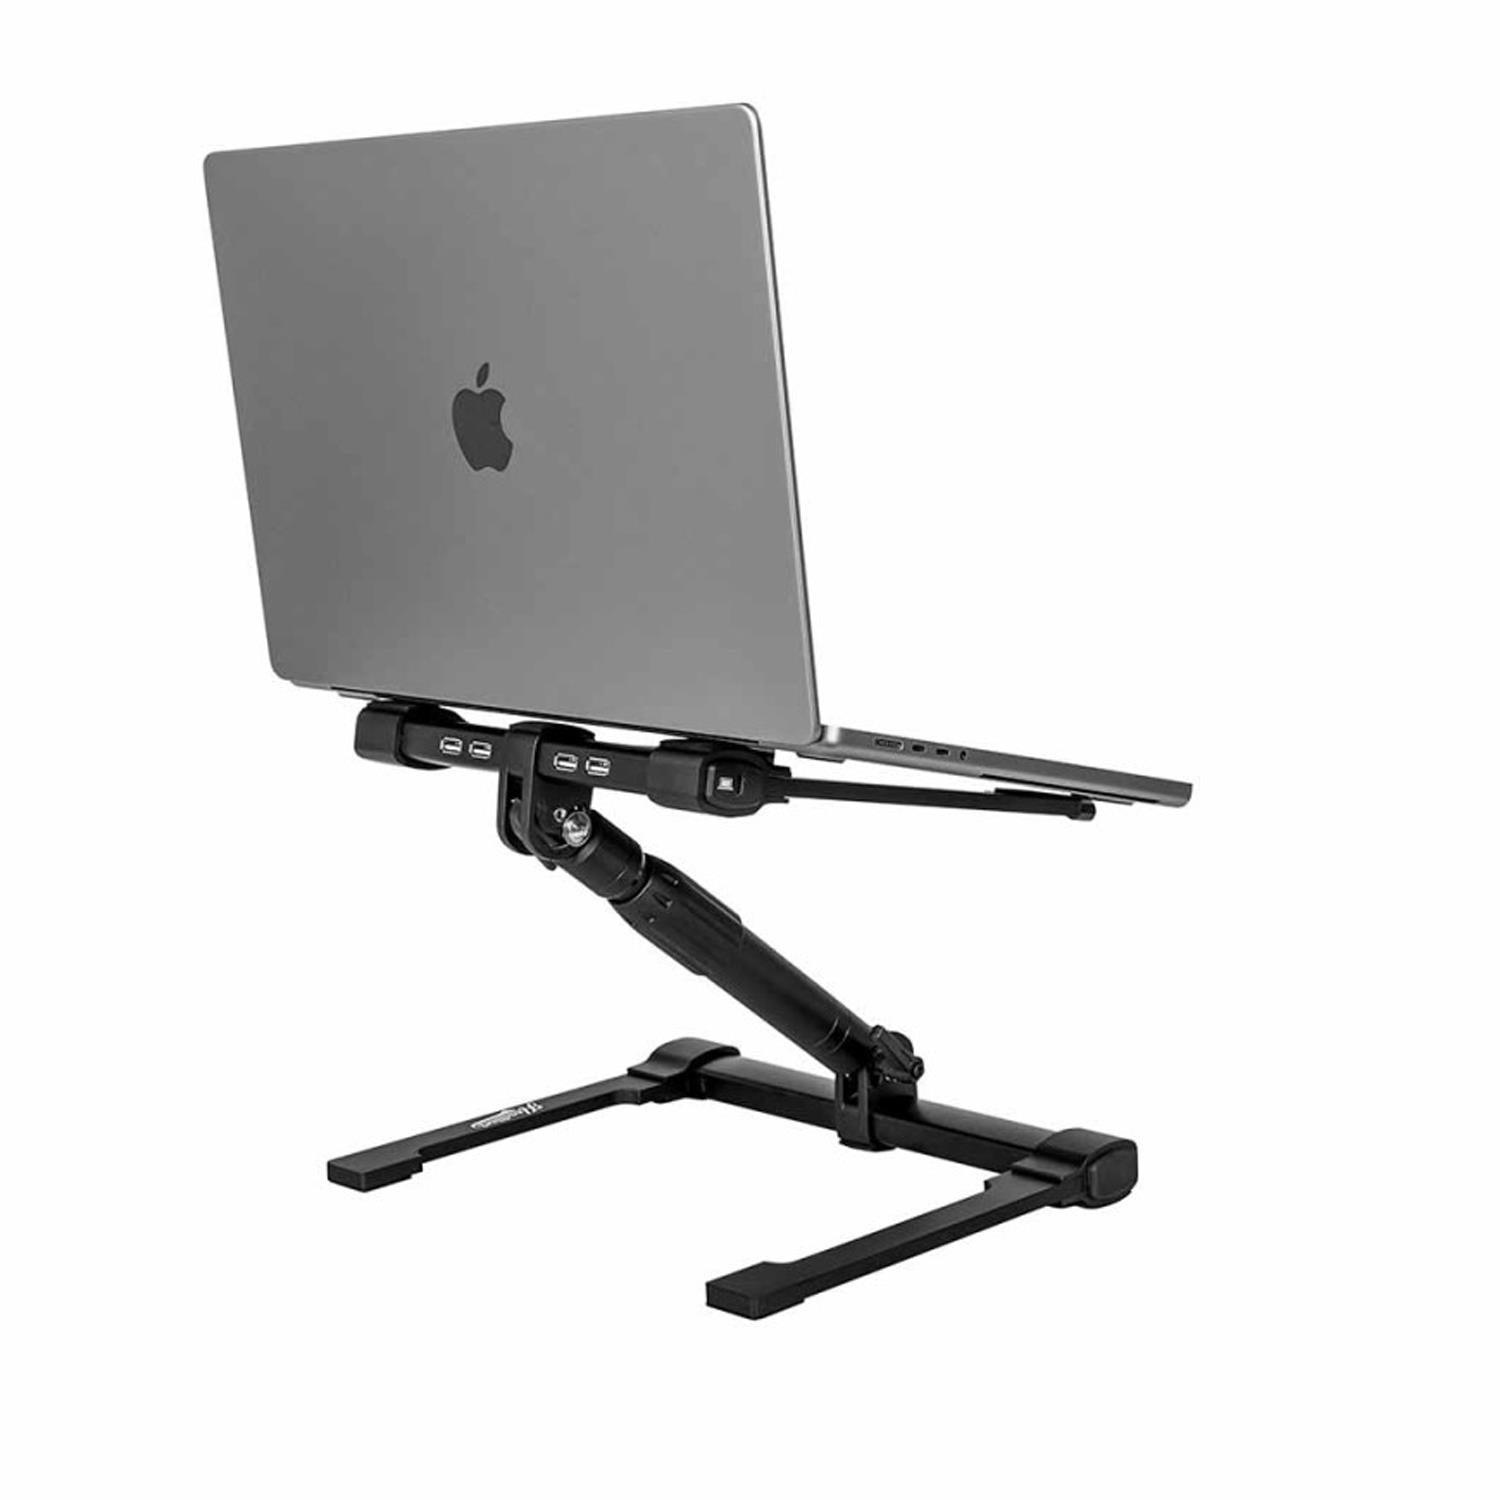 Headliner Gigastand USB Laptop Stand - DY Pro Audio